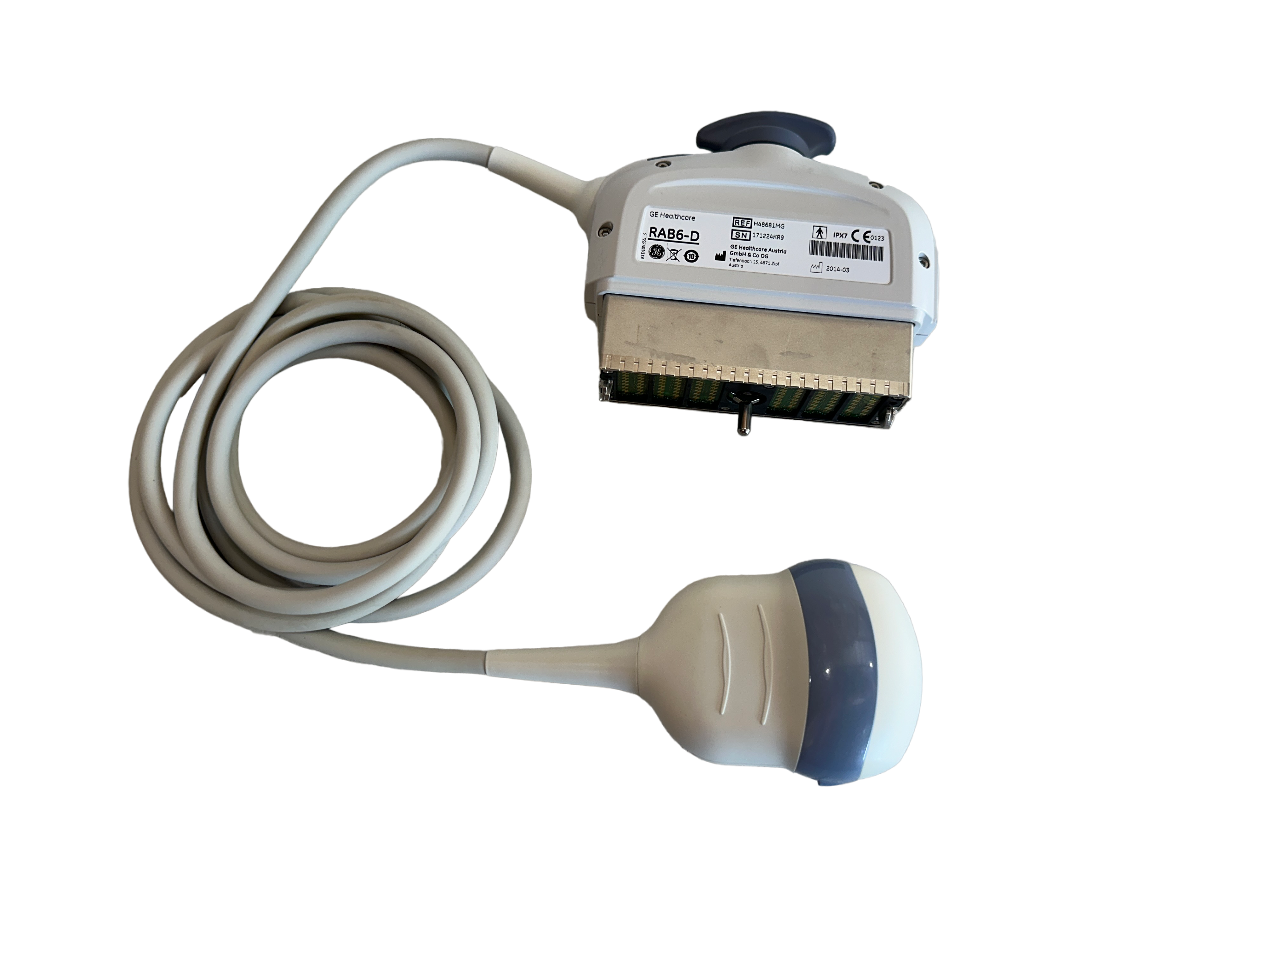 GE RAB6-D 4D probe Transducer  Warrmty 6 months DIAGNOSTIC ULTRASOUND MACHINES FOR SALE